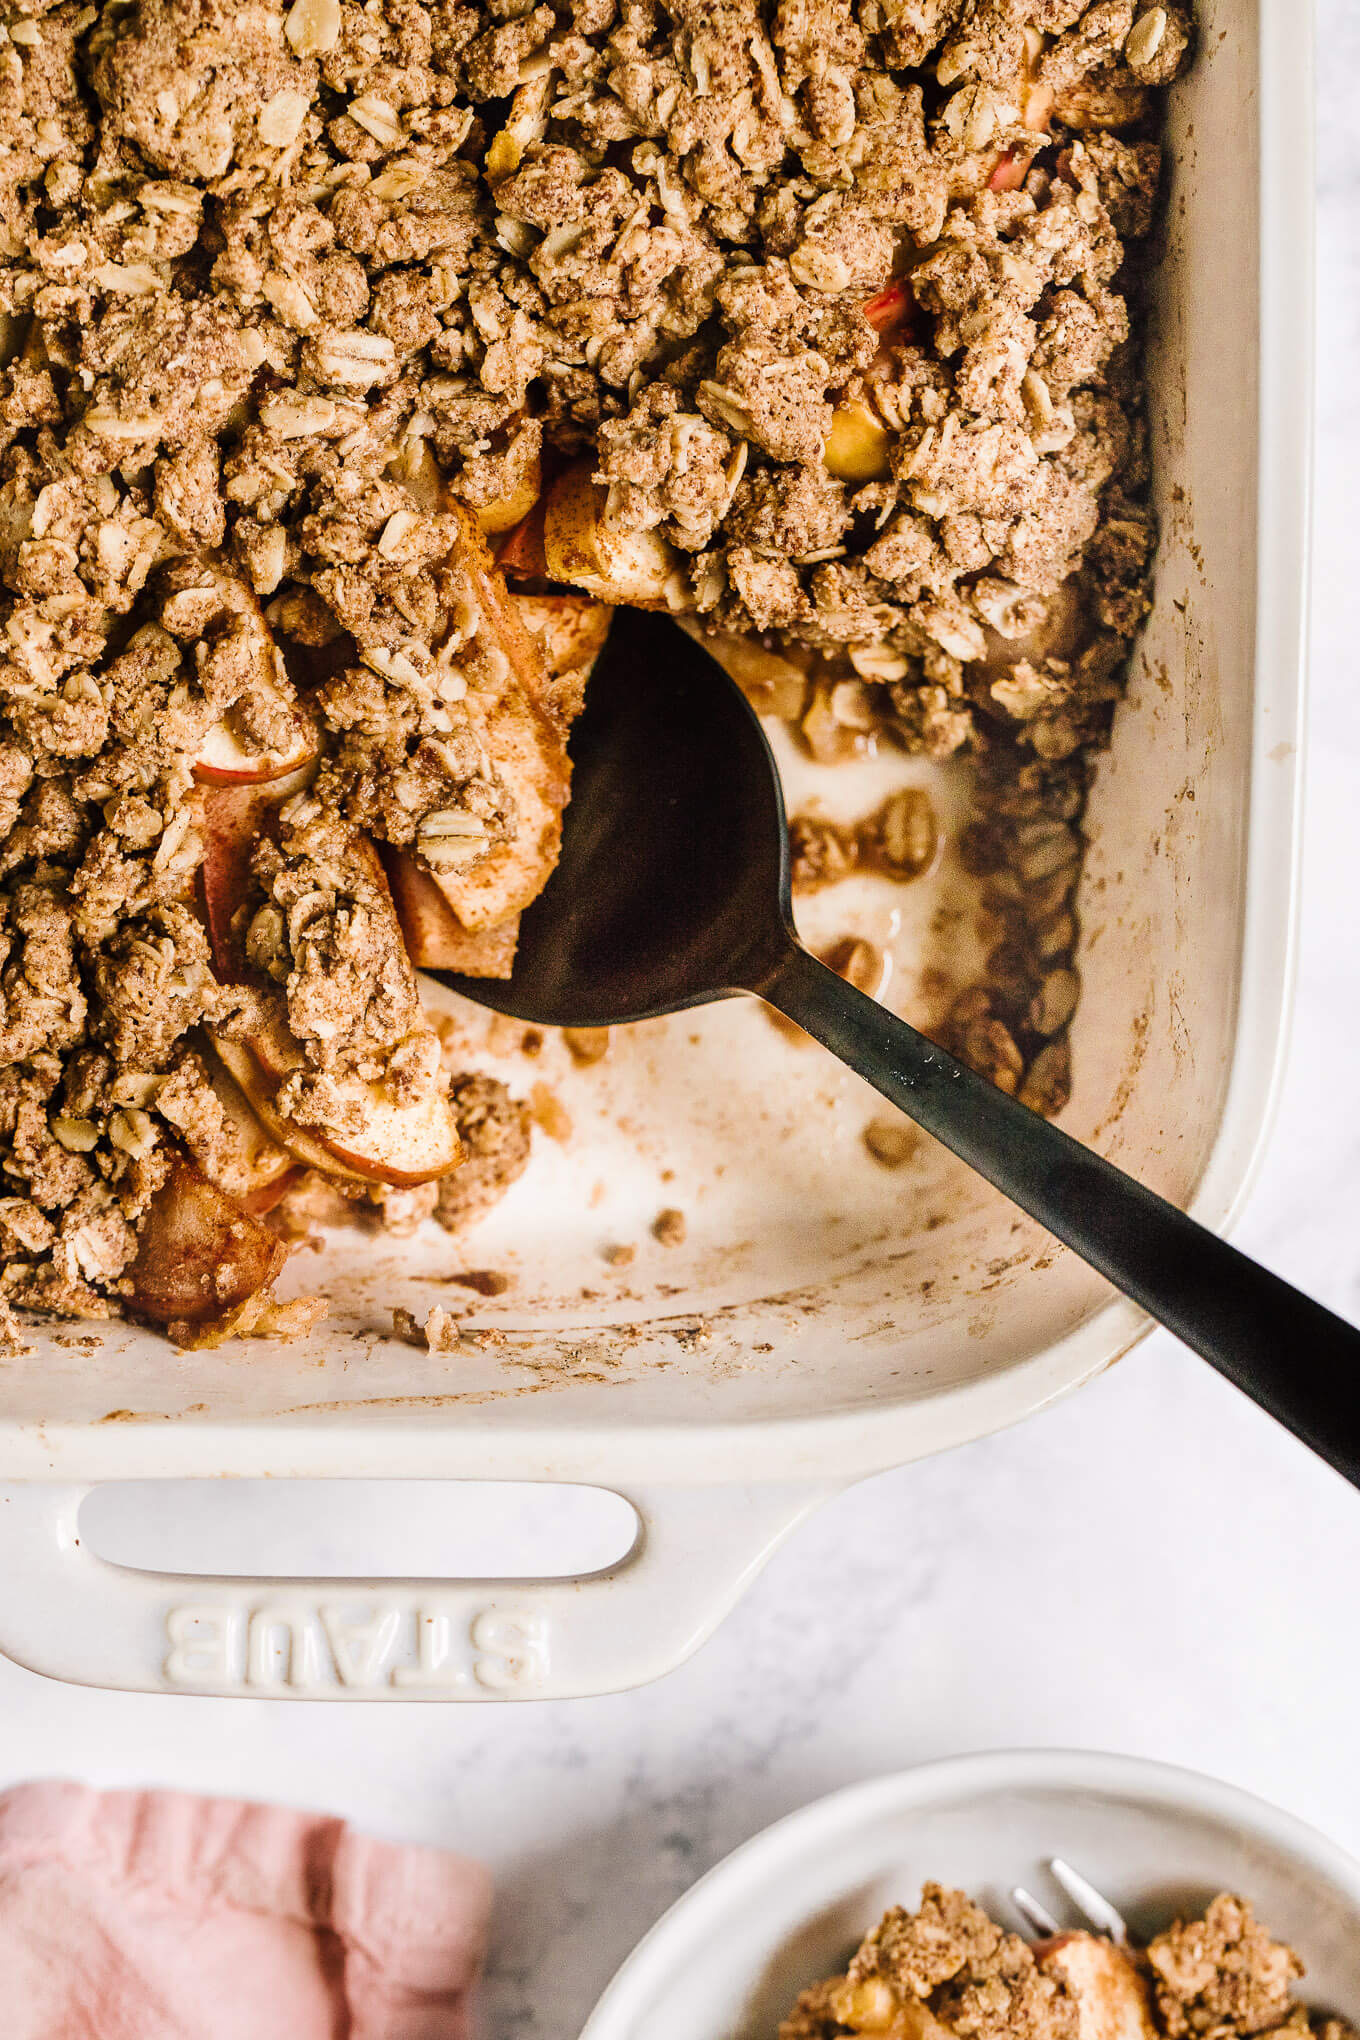 Scooping out a portion of almond butter apple crisp in Stuab baking dish